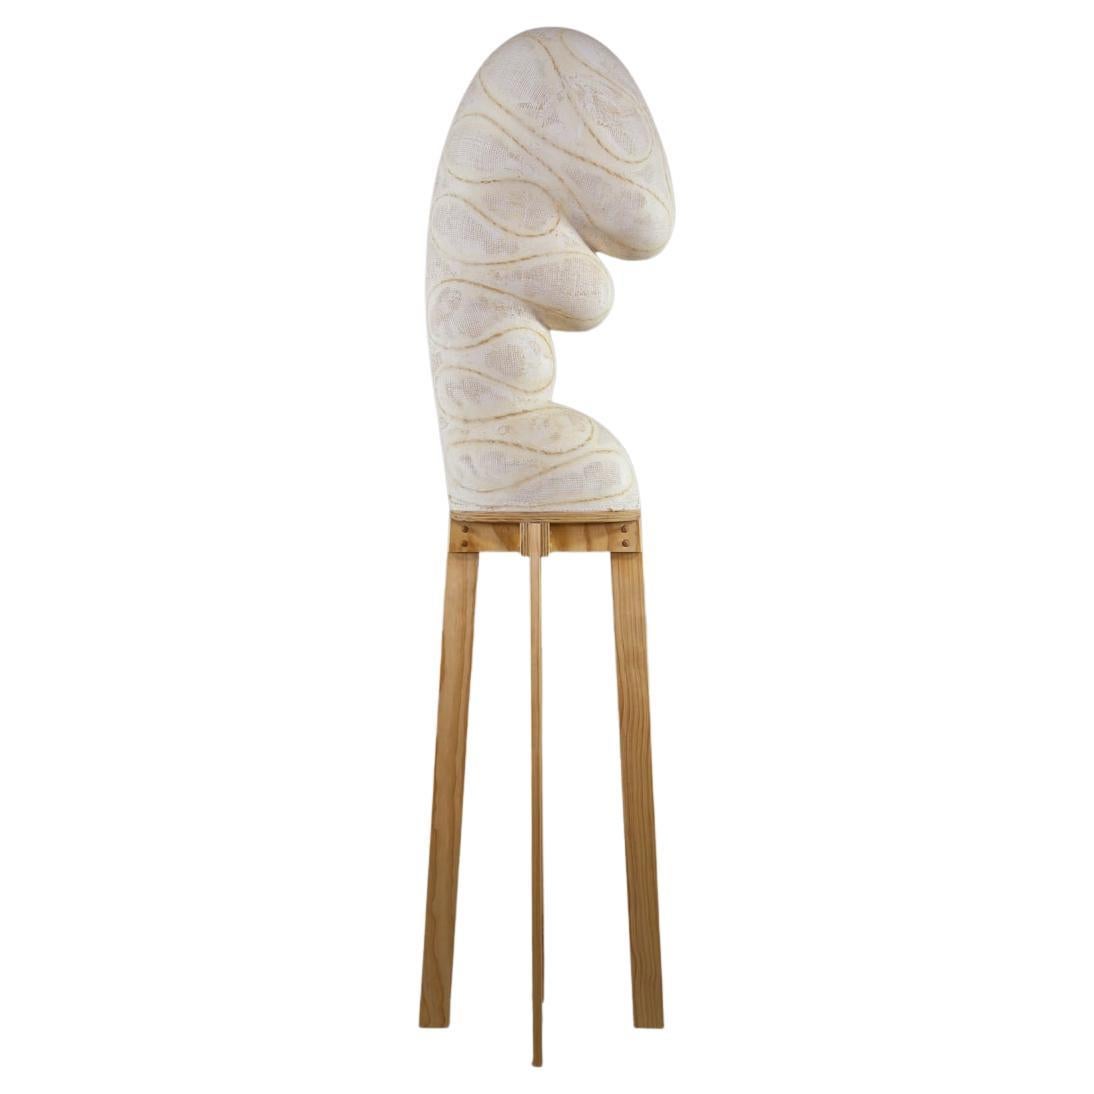 Large-Scale Biomorphic Plaster Sculpture on Artist-Built Wooden Stand